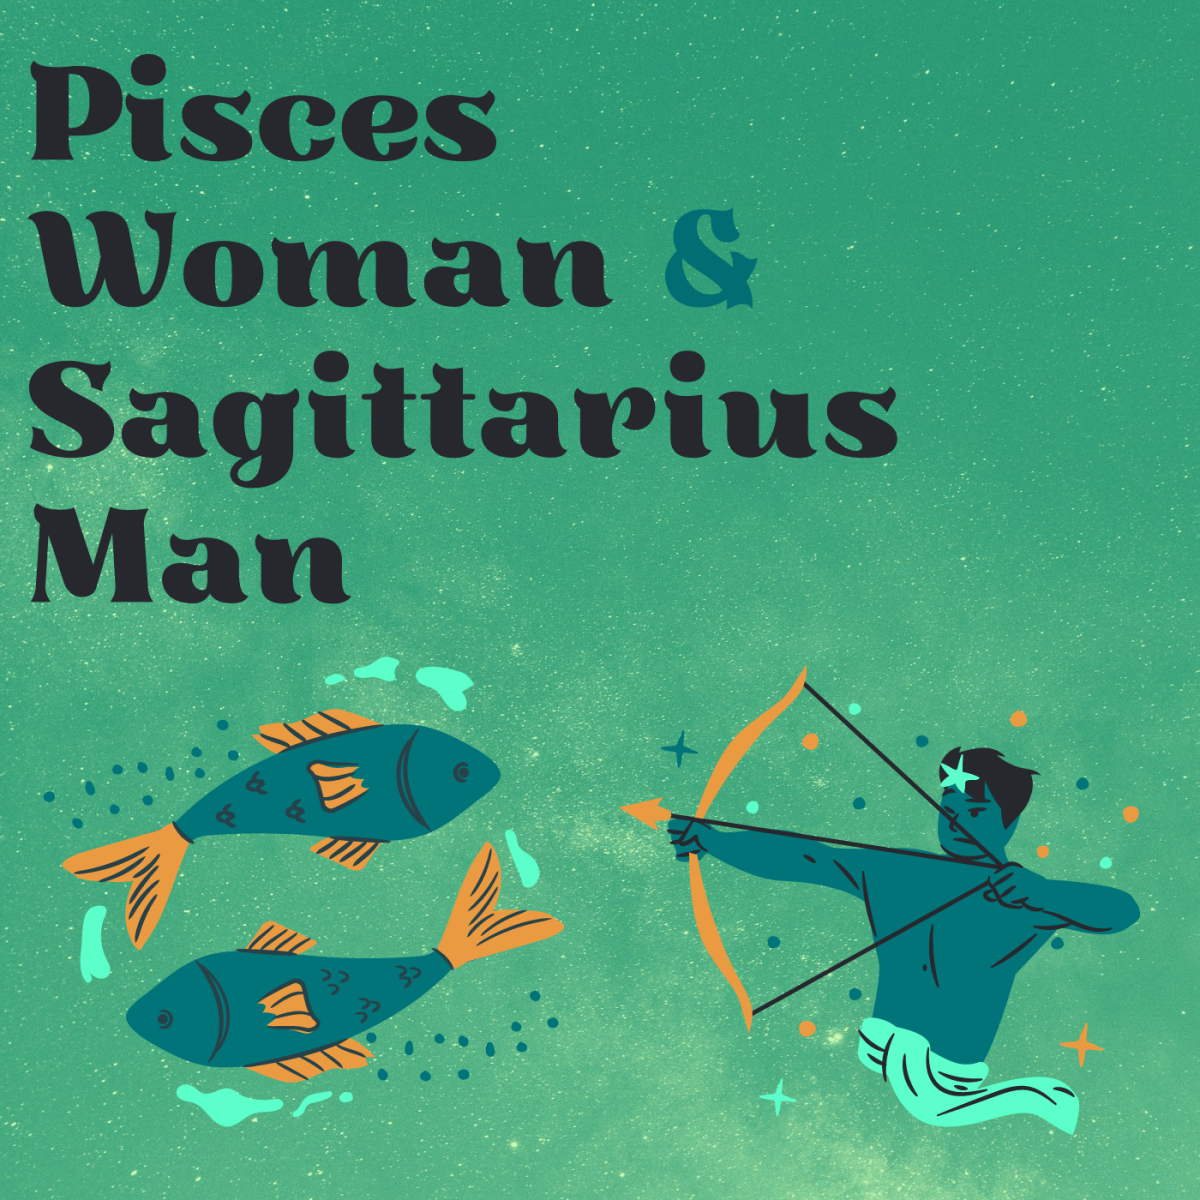 How well do a male Sagittarius and a female Pisces get along?